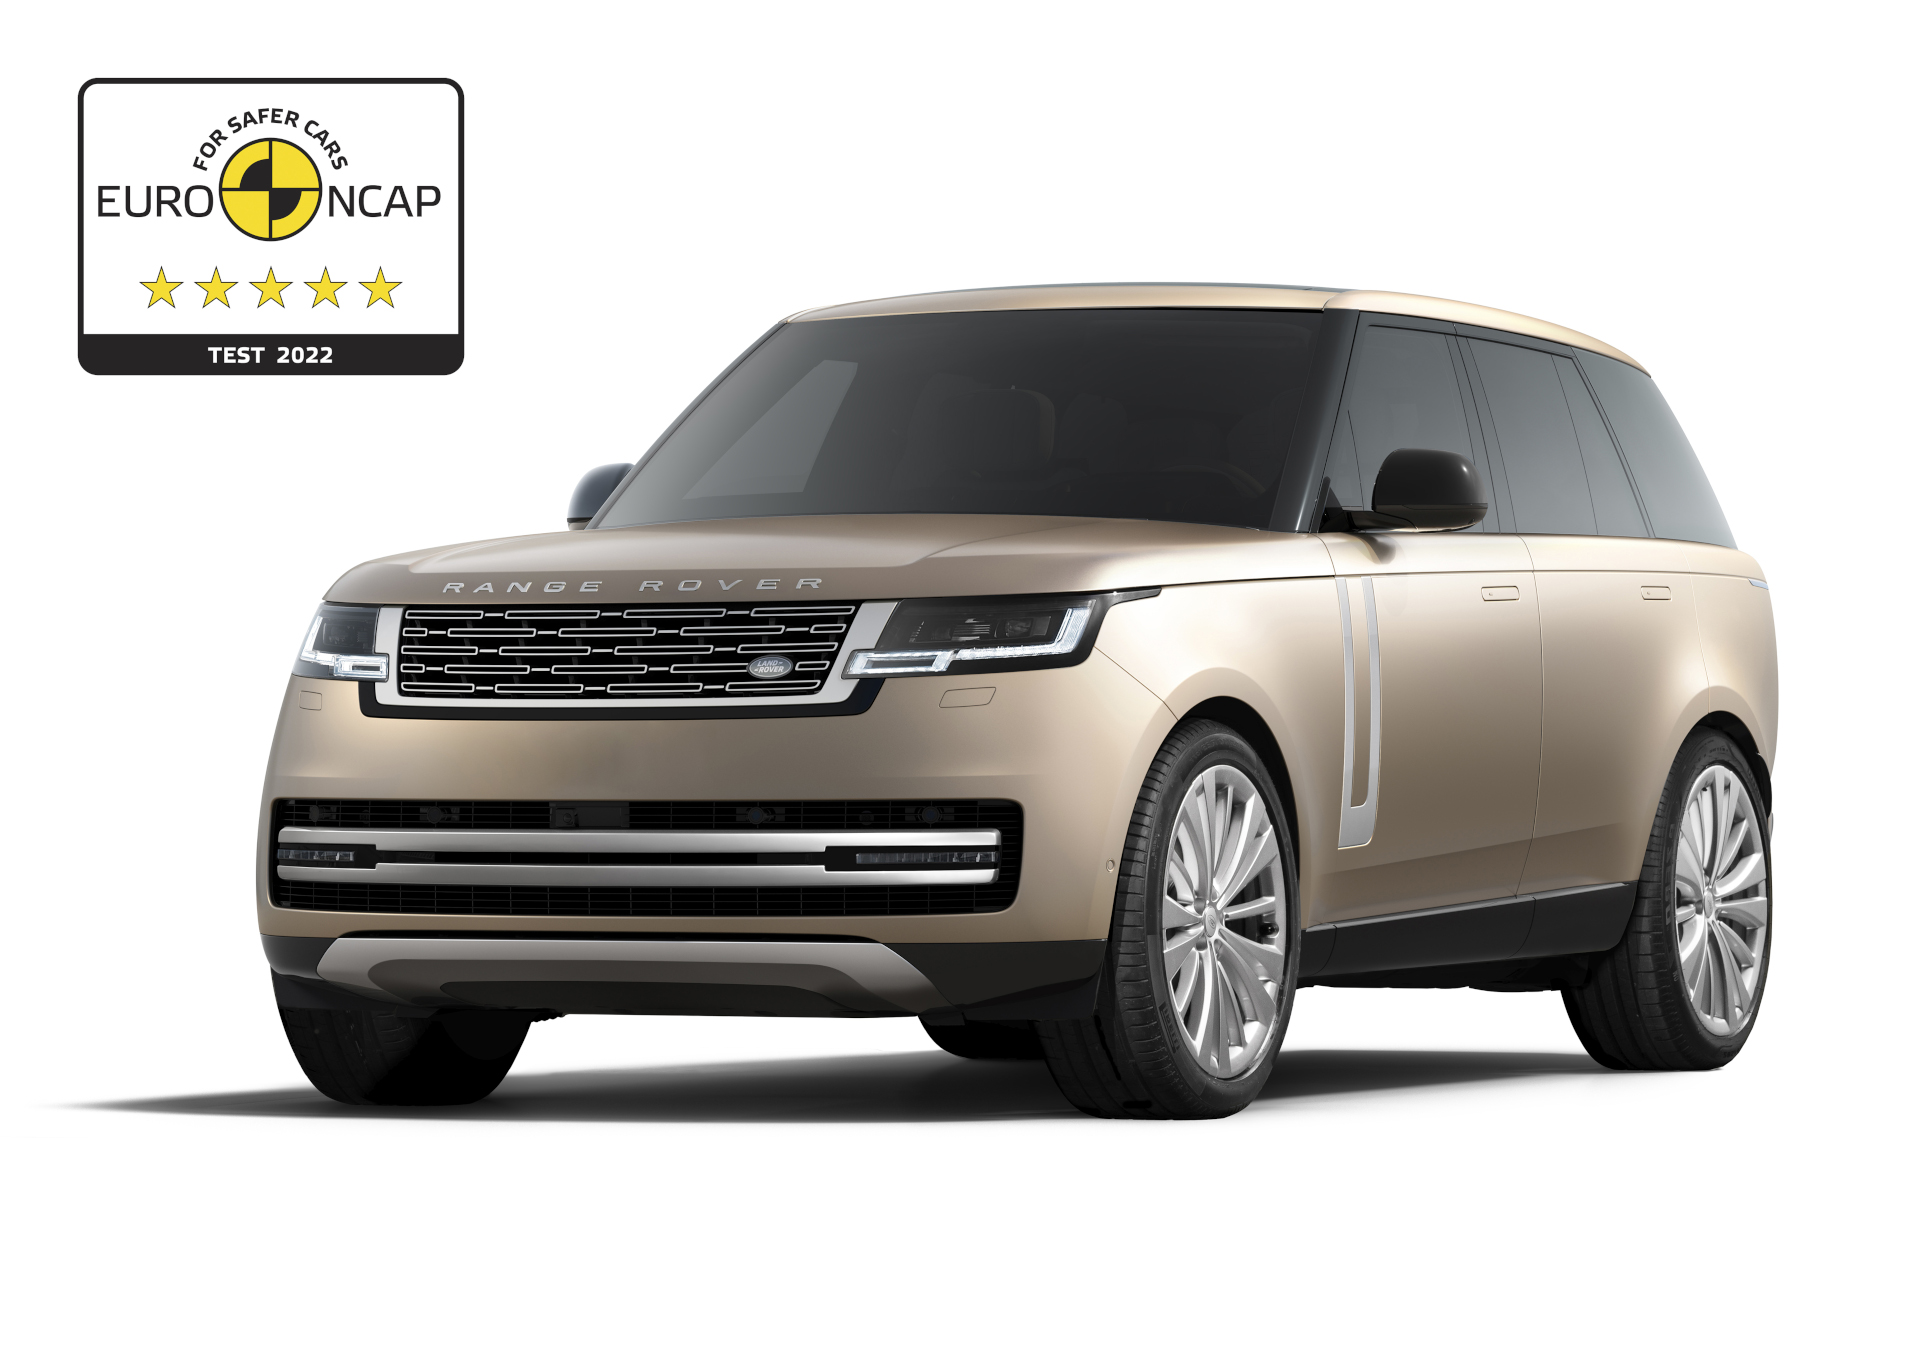 EURO NCAP – RANGE ROVER AND RANGE ROVER SPORT AWARDED FIVE STAR RATINGS